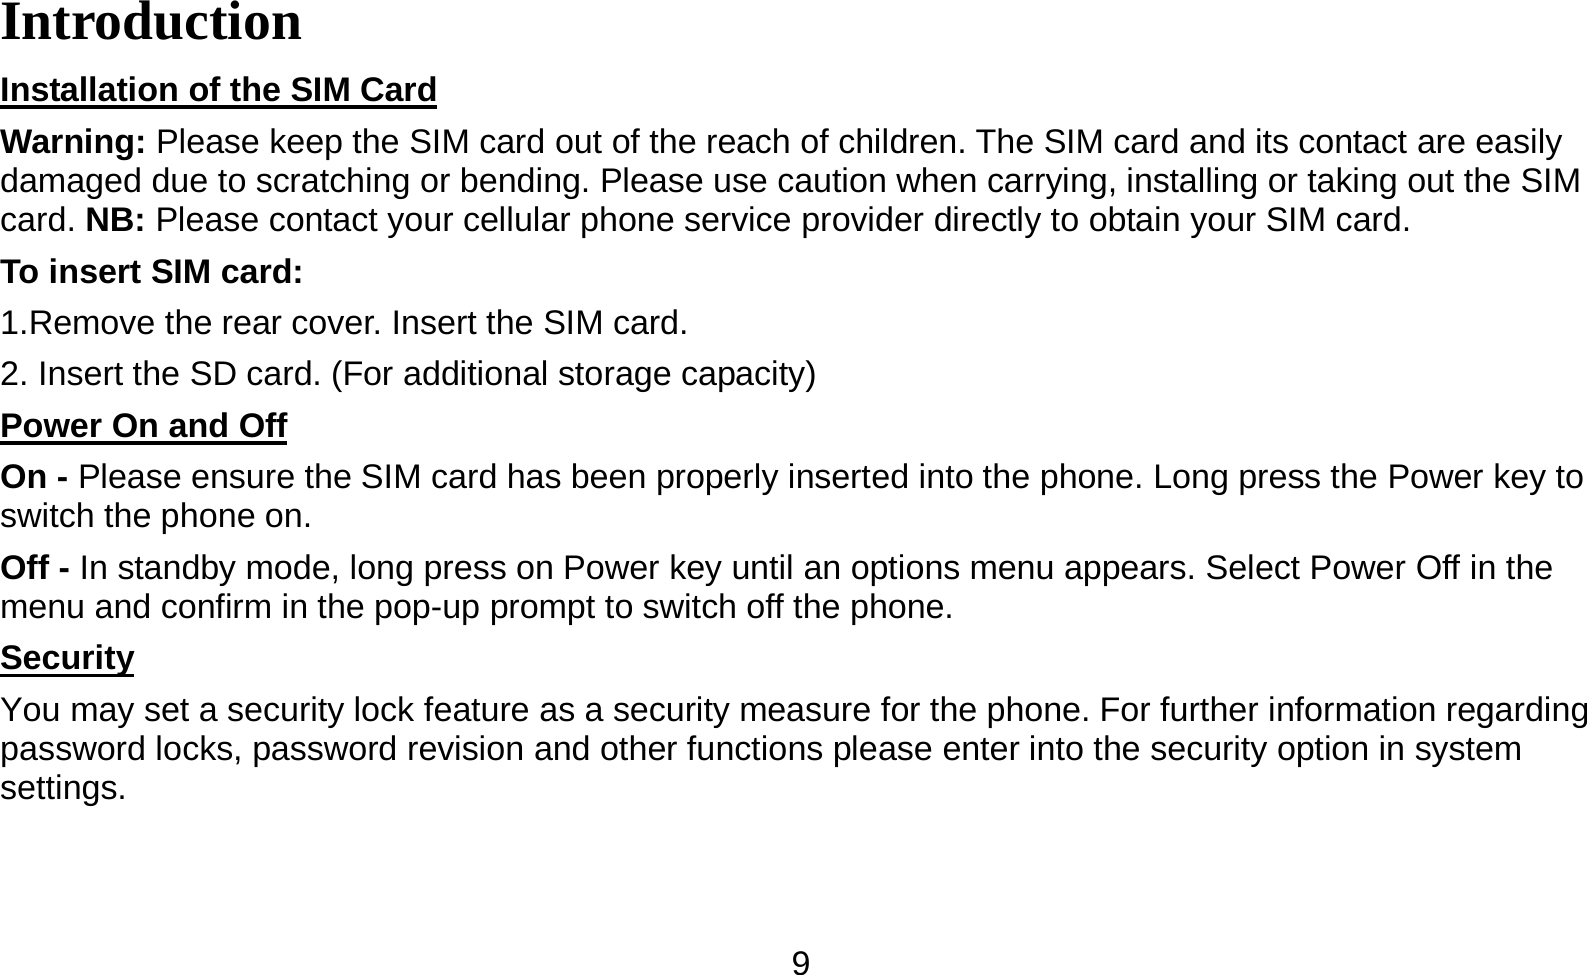   9Introduction Installation of the SIM Card                                                                         Warning: Please keep the SIM card out of the reach of children. The SIM card and its contact are easily damaged due to scratching or bending. Please use caution when carrying, installing or taking out the SIM card. NB: Please contact your cellular phone service provider directly to obtain your SIM card. To insert SIM card: 1.Remove the rear cover. Insert the SIM card.   2. Insert the SD card. (For additional storage capacity) Power On and Off                                                                                  On - Please ensure the SIM card has been properly inserted into the phone. Long press the Power key to switch the phone on. Off - In standby mode, long press on Power key until an options menu appears. Select Power Off in the menu and confirm in the pop-up prompt to switch off the phone. Security                                                                                           You may set a security lock feature as a security measure for the phone. For further information regarding password locks, password revision and other functions please enter into the security option in system settings. 